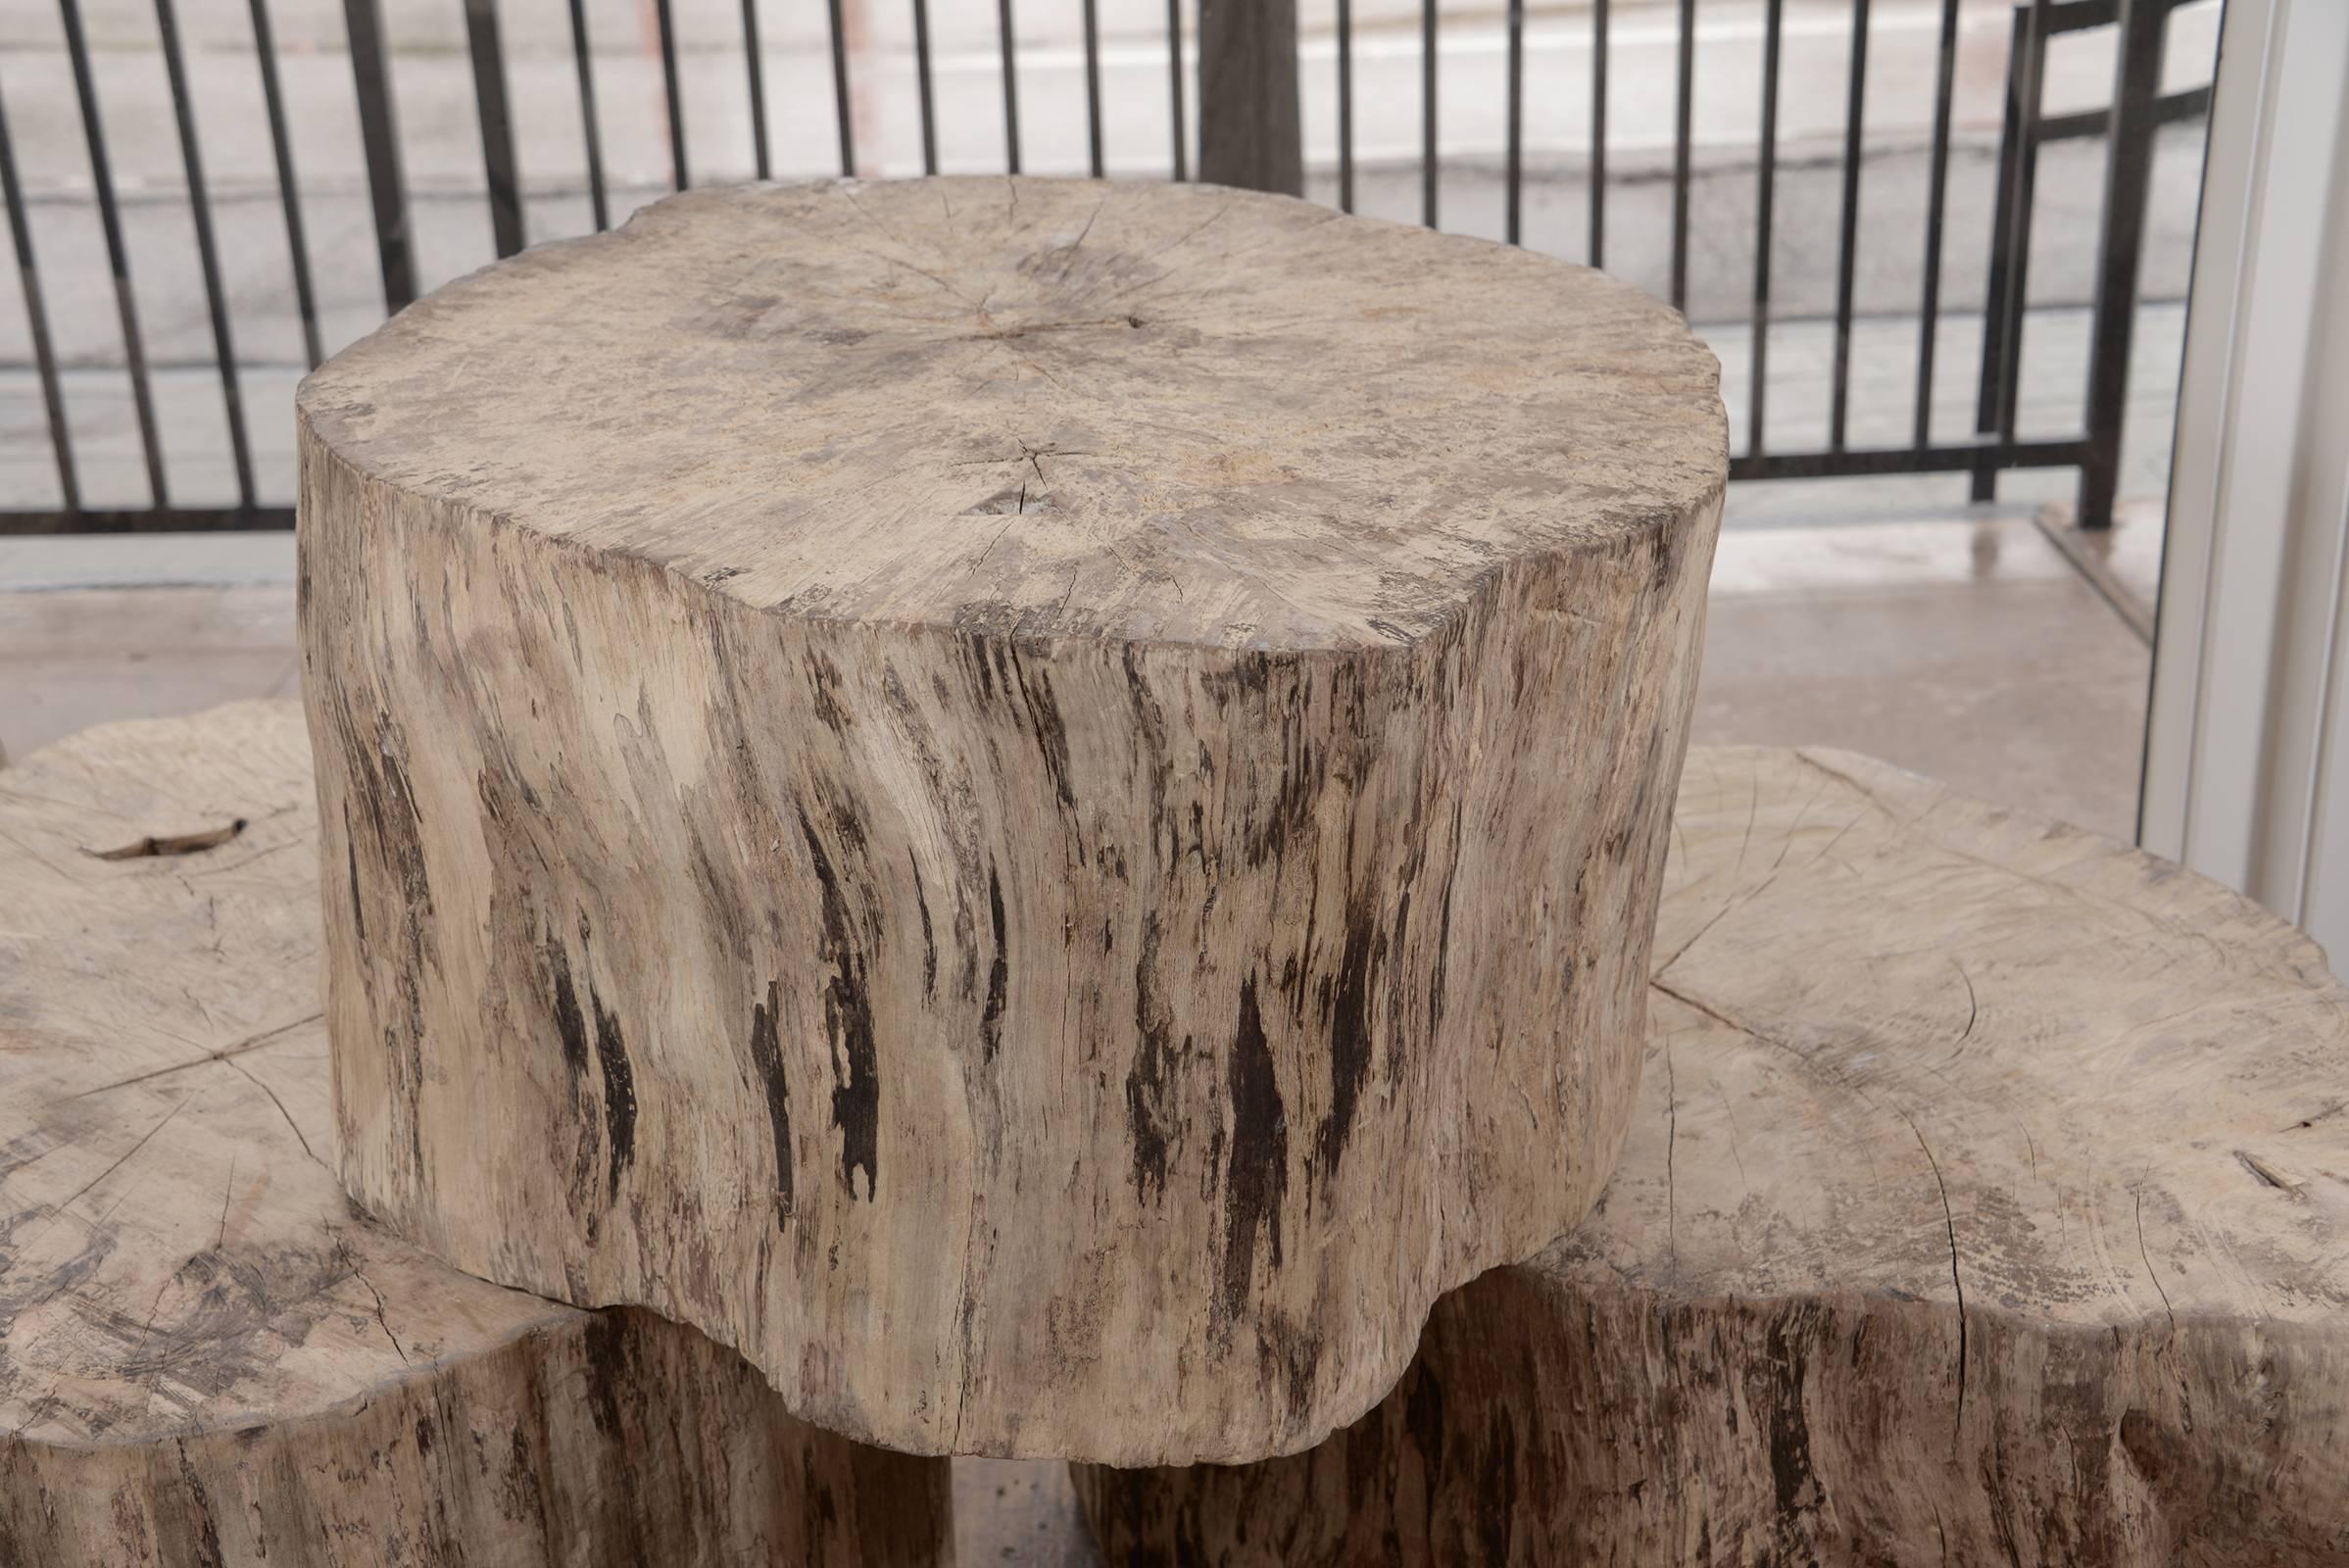 Organic sycamore stump tables from Belgium. Each one has a different form, could be used as side tables, or coffee table. These are functional as the tops are smooth. The sizes vary contact us for exact dimensions.